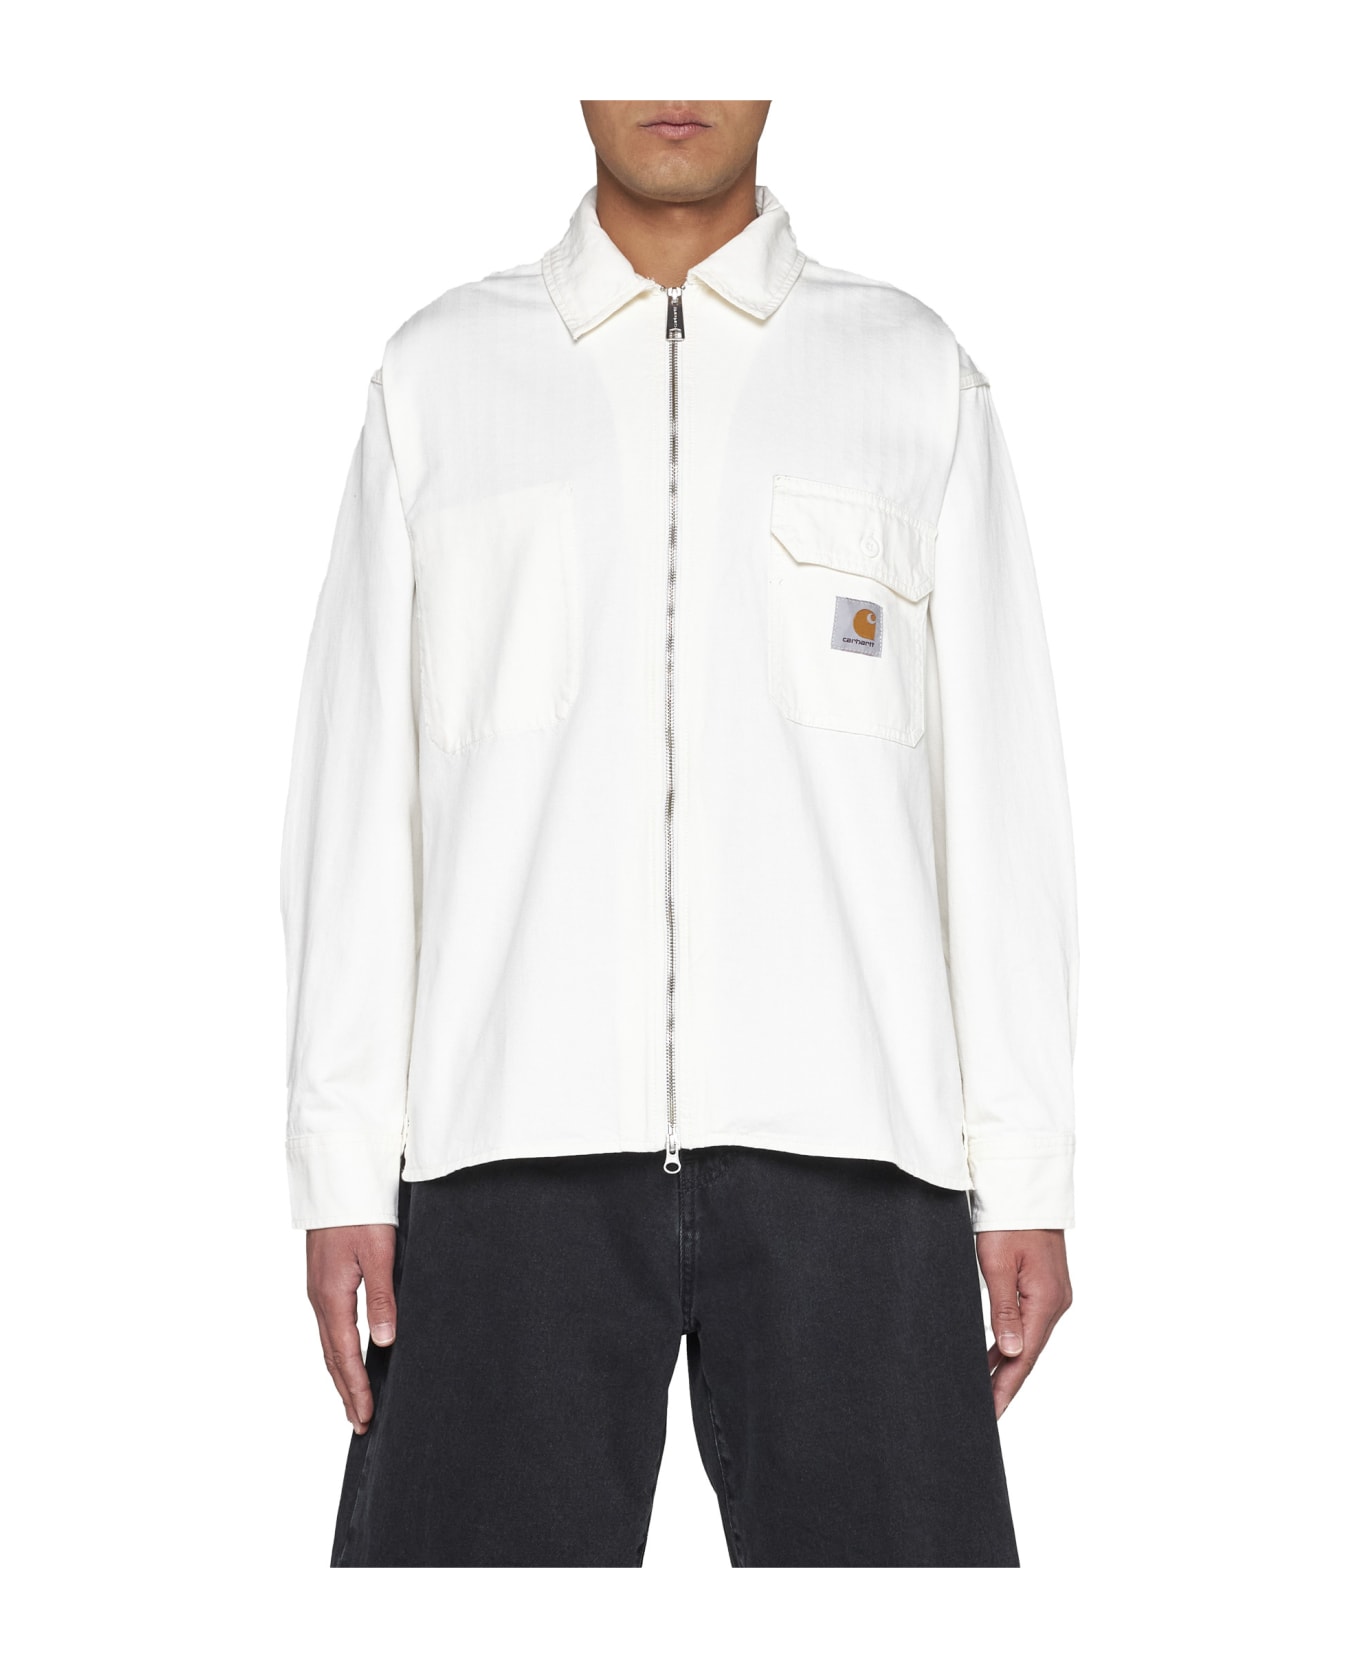 Carhartt Jacket - Off-white rinsed